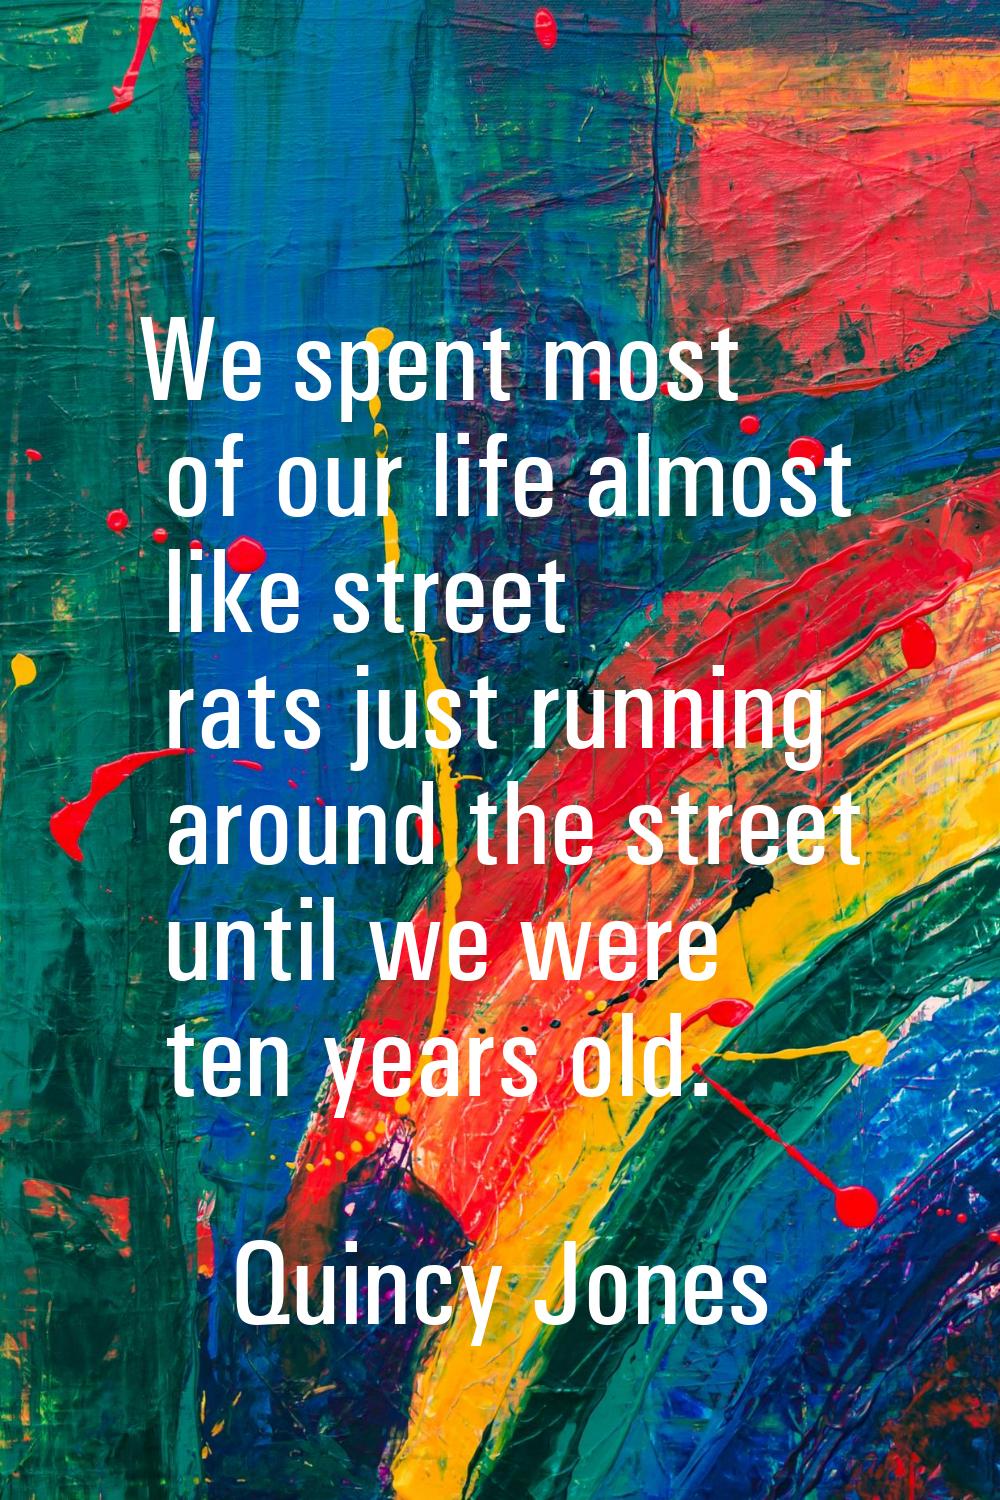 We spent most of our life almost like street rats just running around the street until we were ten 